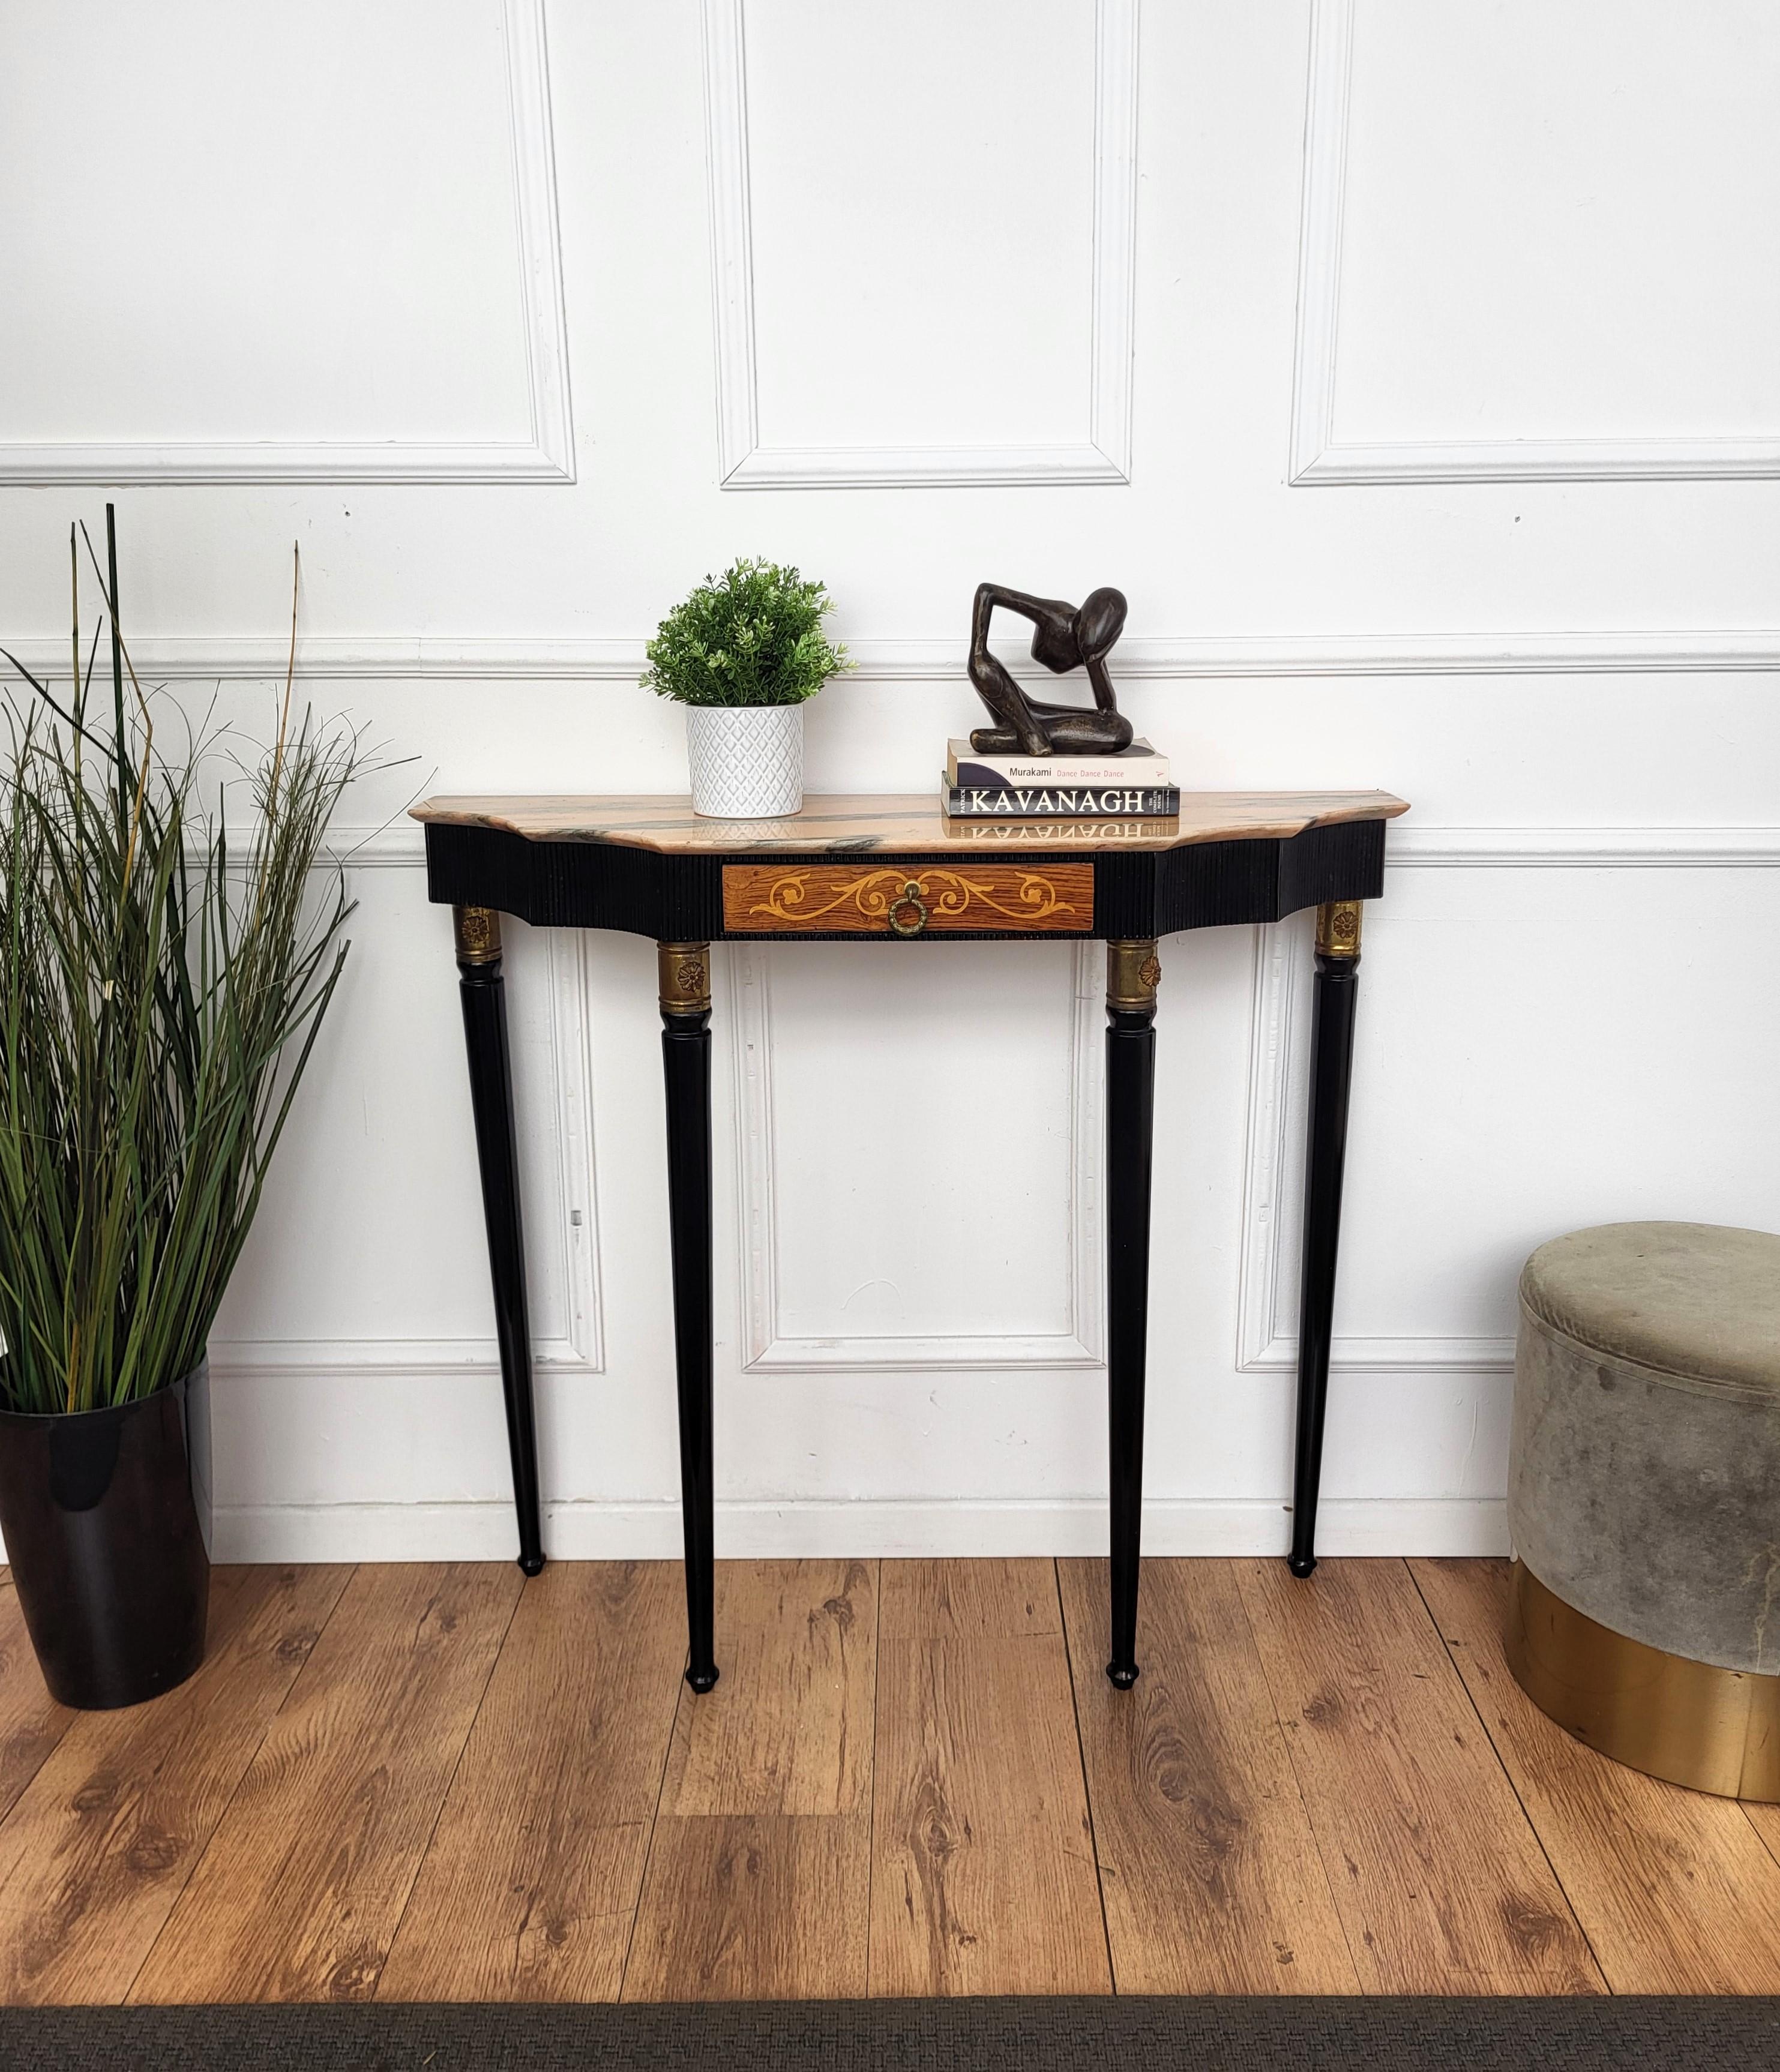 Very elegant and refined Italian 1950s Mid-Century Modern and neoclassical design console table highlighted by the slatted workmanship of the wooden top part and the decorated central drawer. The four elegantly shaped legs decorated with brass